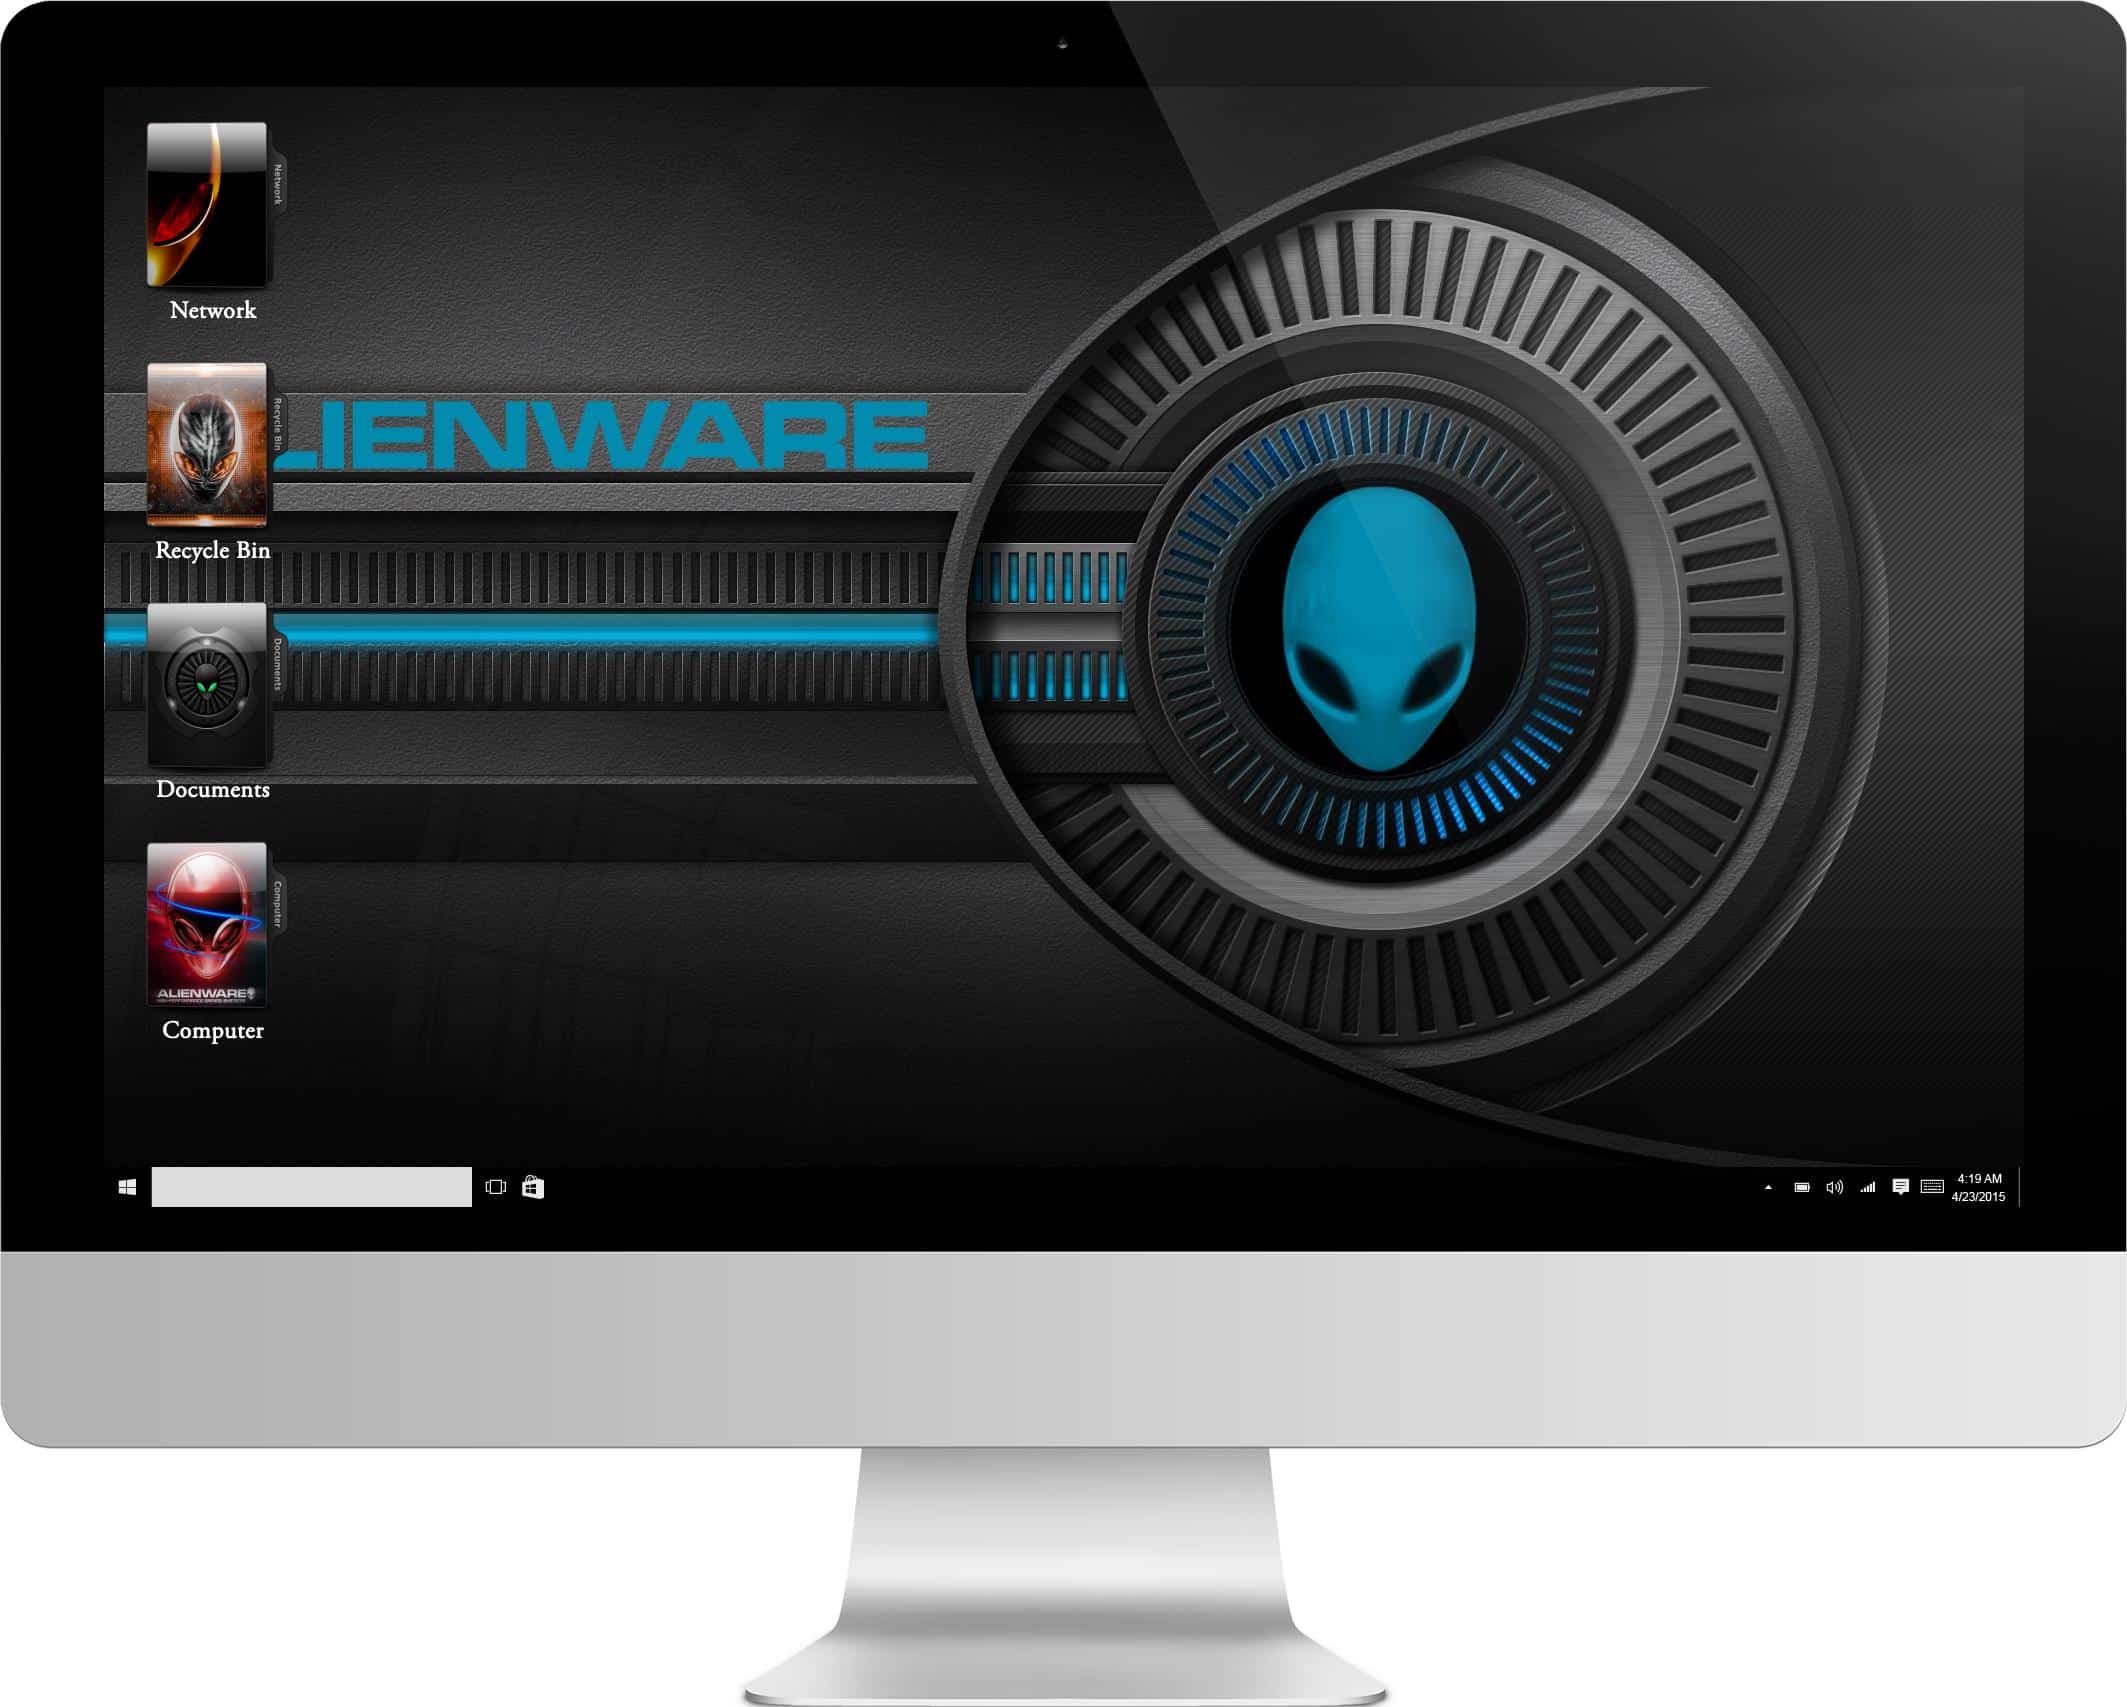 Alienware Theme Pack For Windows 10 - HD Wallpaper 